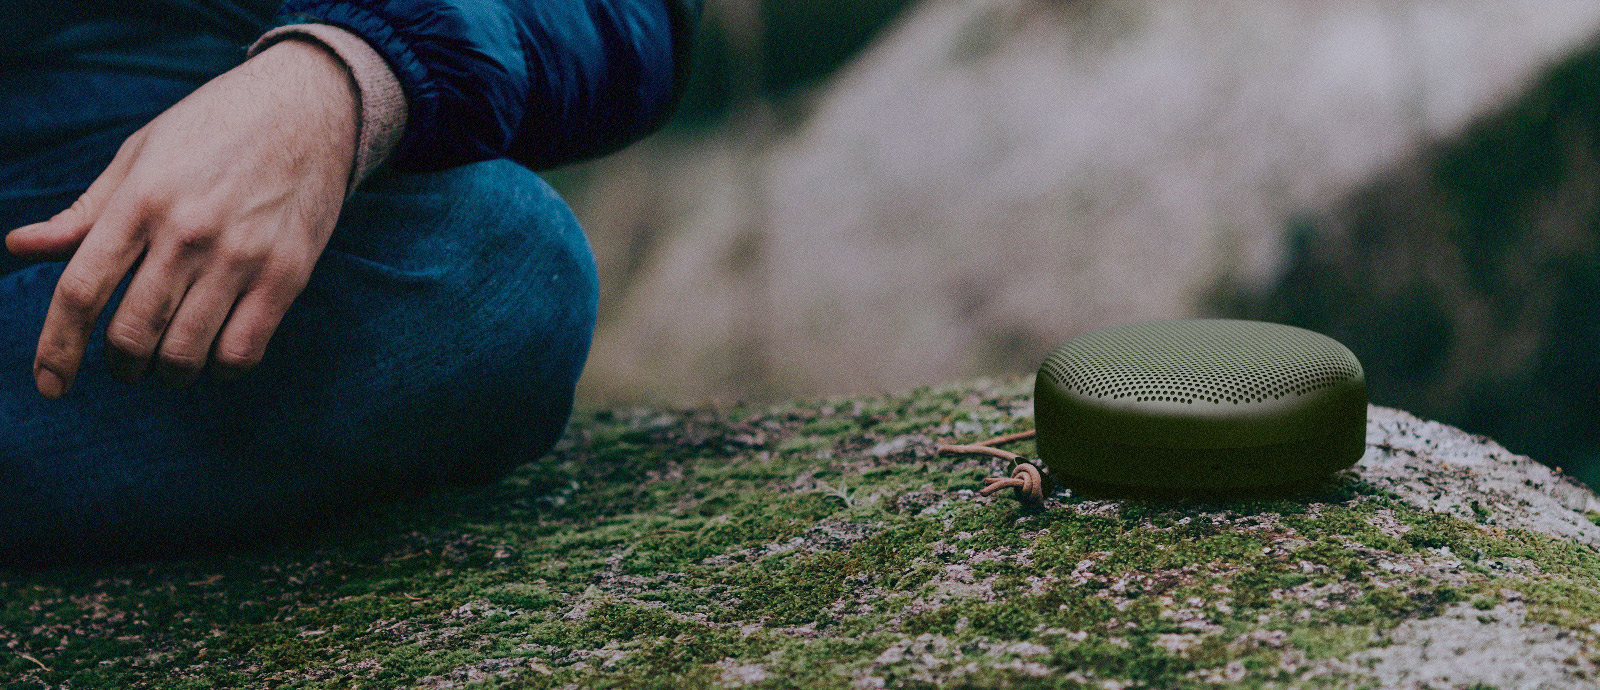 B&O Return With Stylish Bluetooth Speaker That Fits In Your Hand